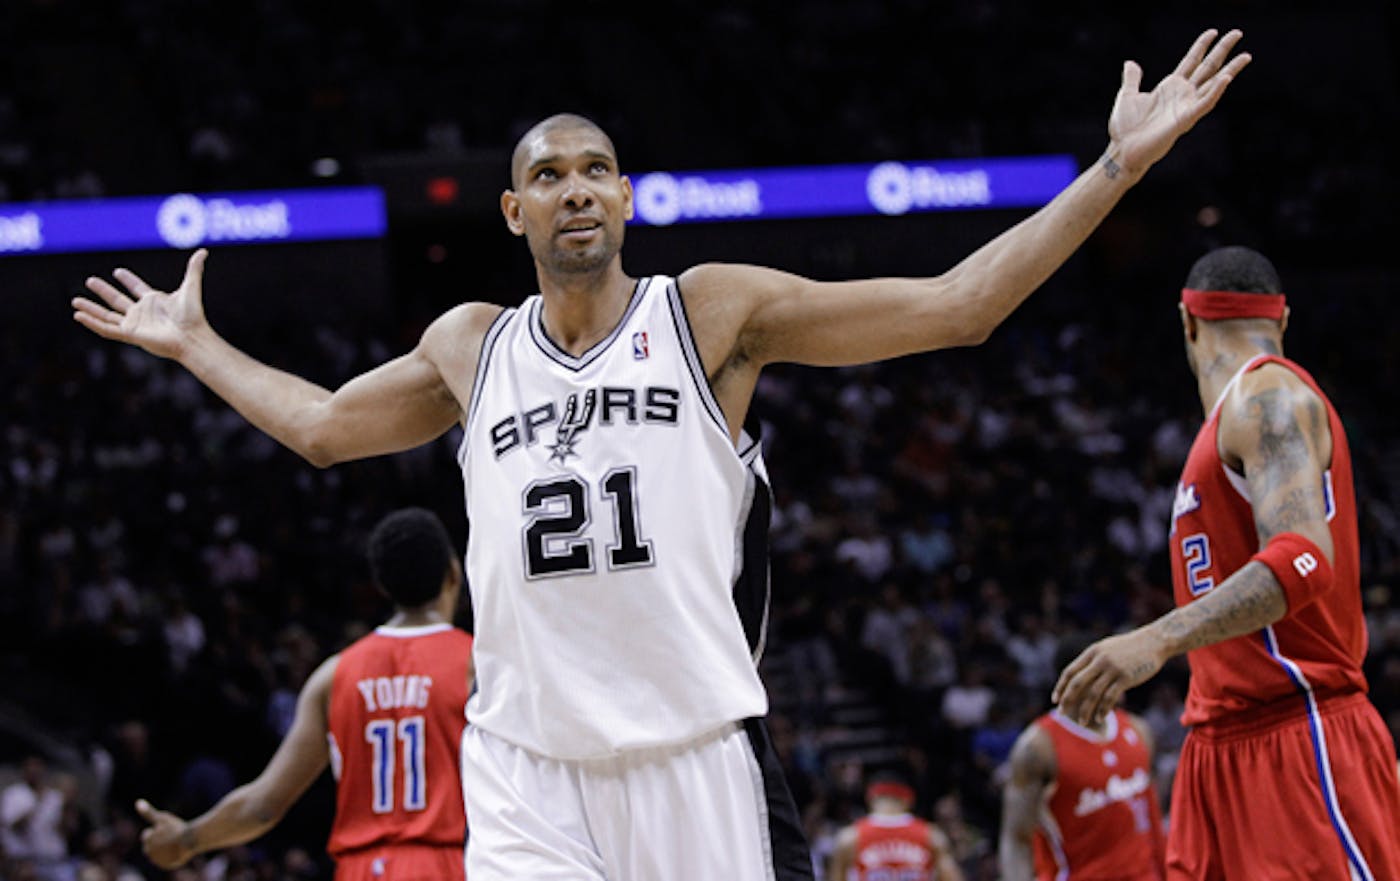 Spurs star Tim Duncan acknowledges that he's appreciating the game more as  career winds down